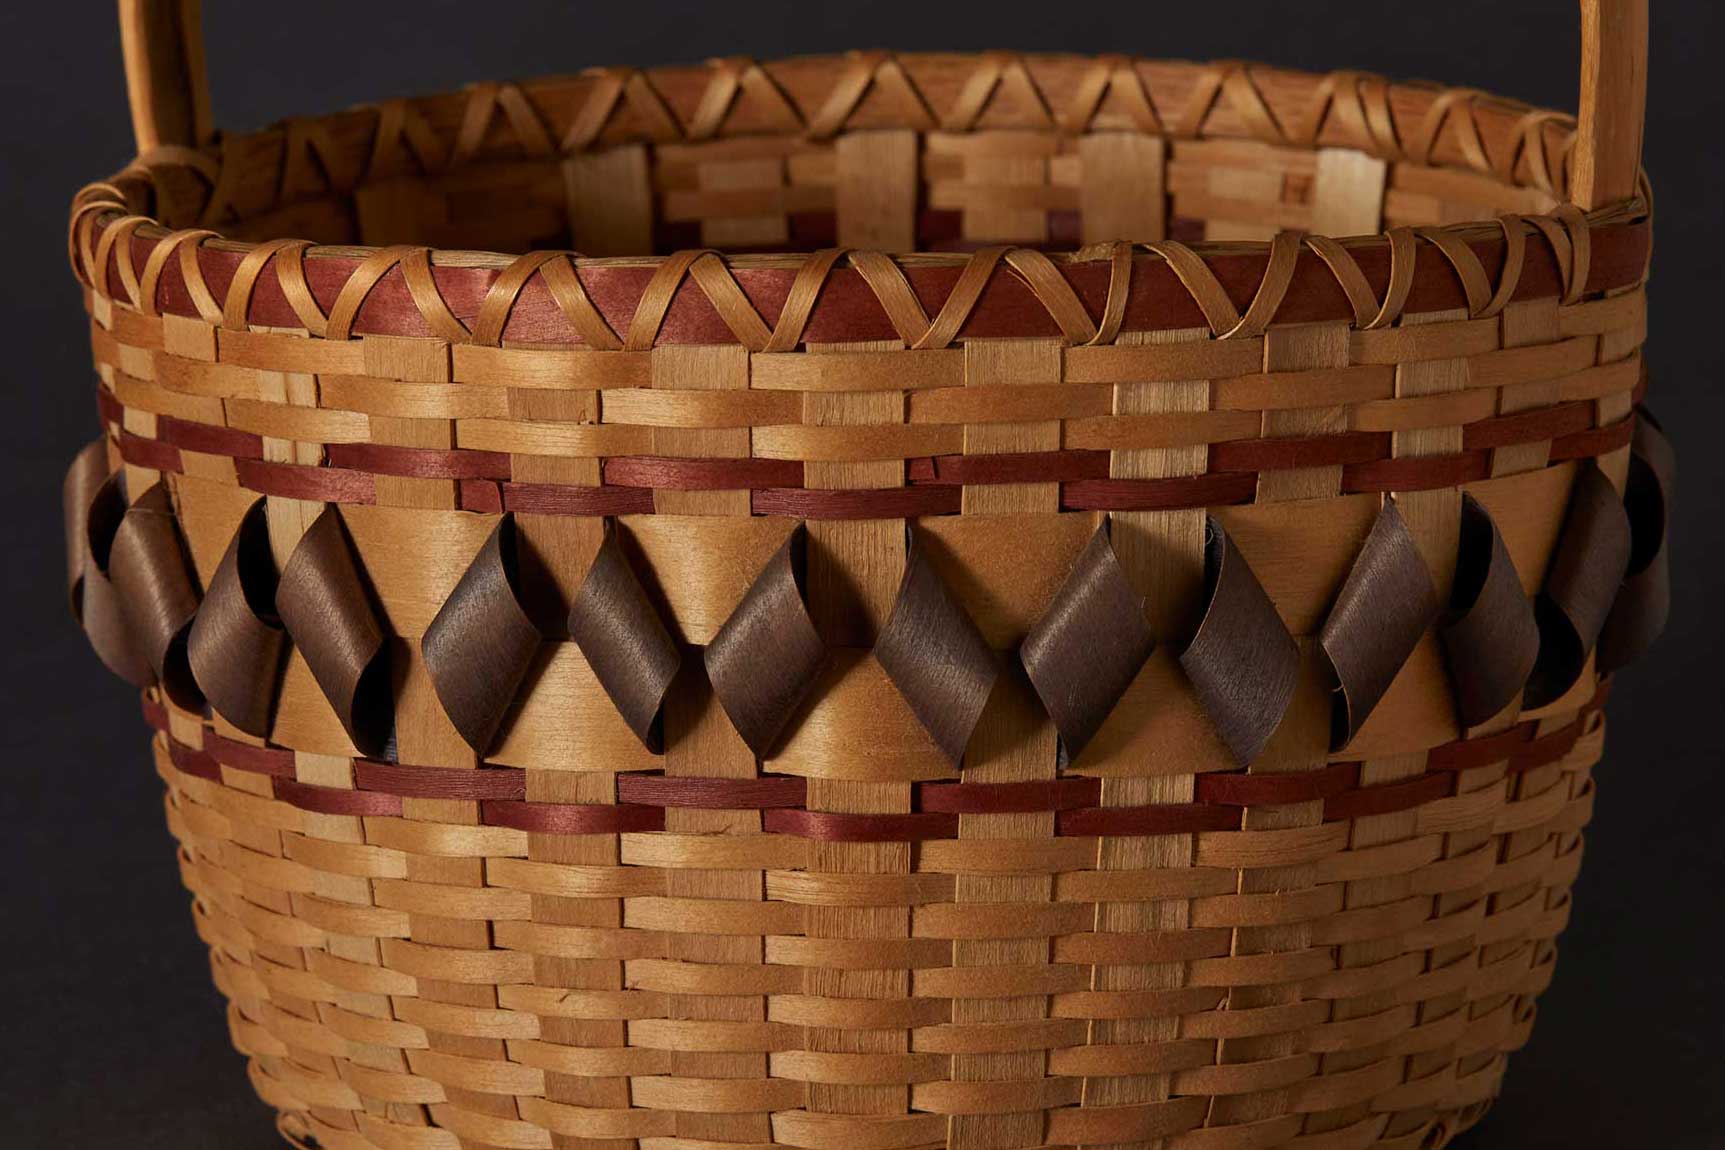 A woven wooden basket in different shades of brown.